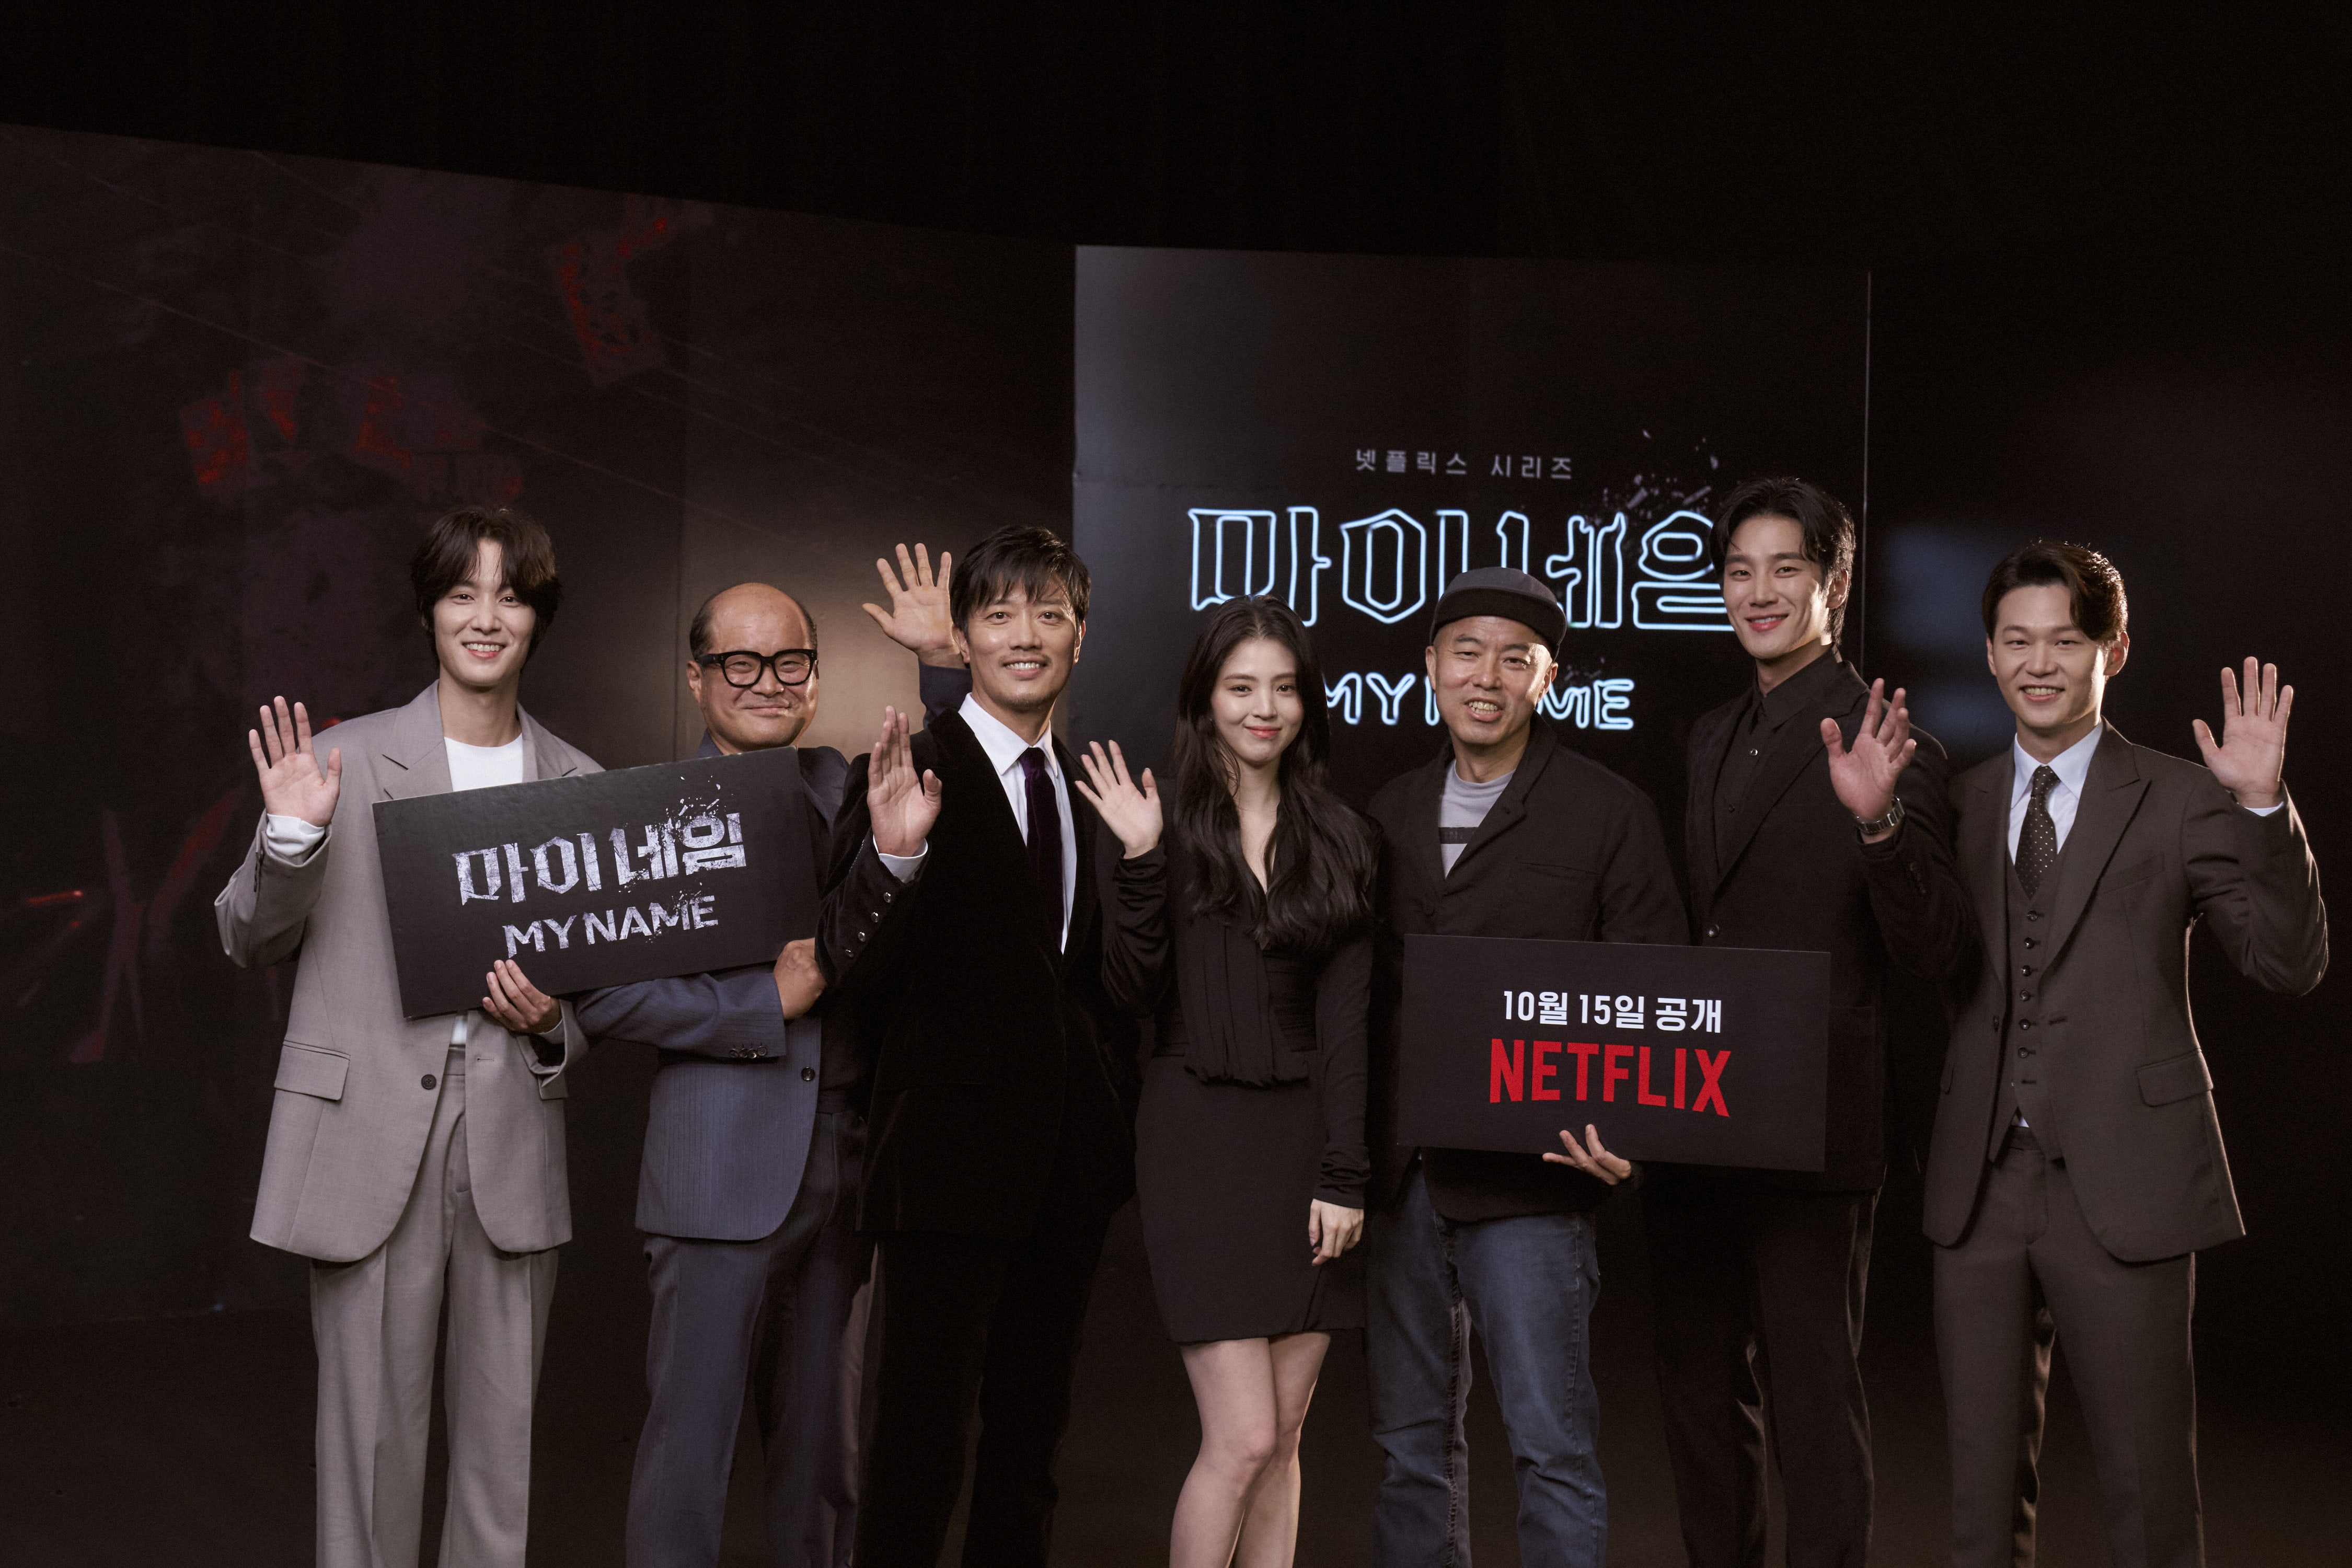 Han So-hee and main cast for 'My Name' standing next to each other waving for a photo